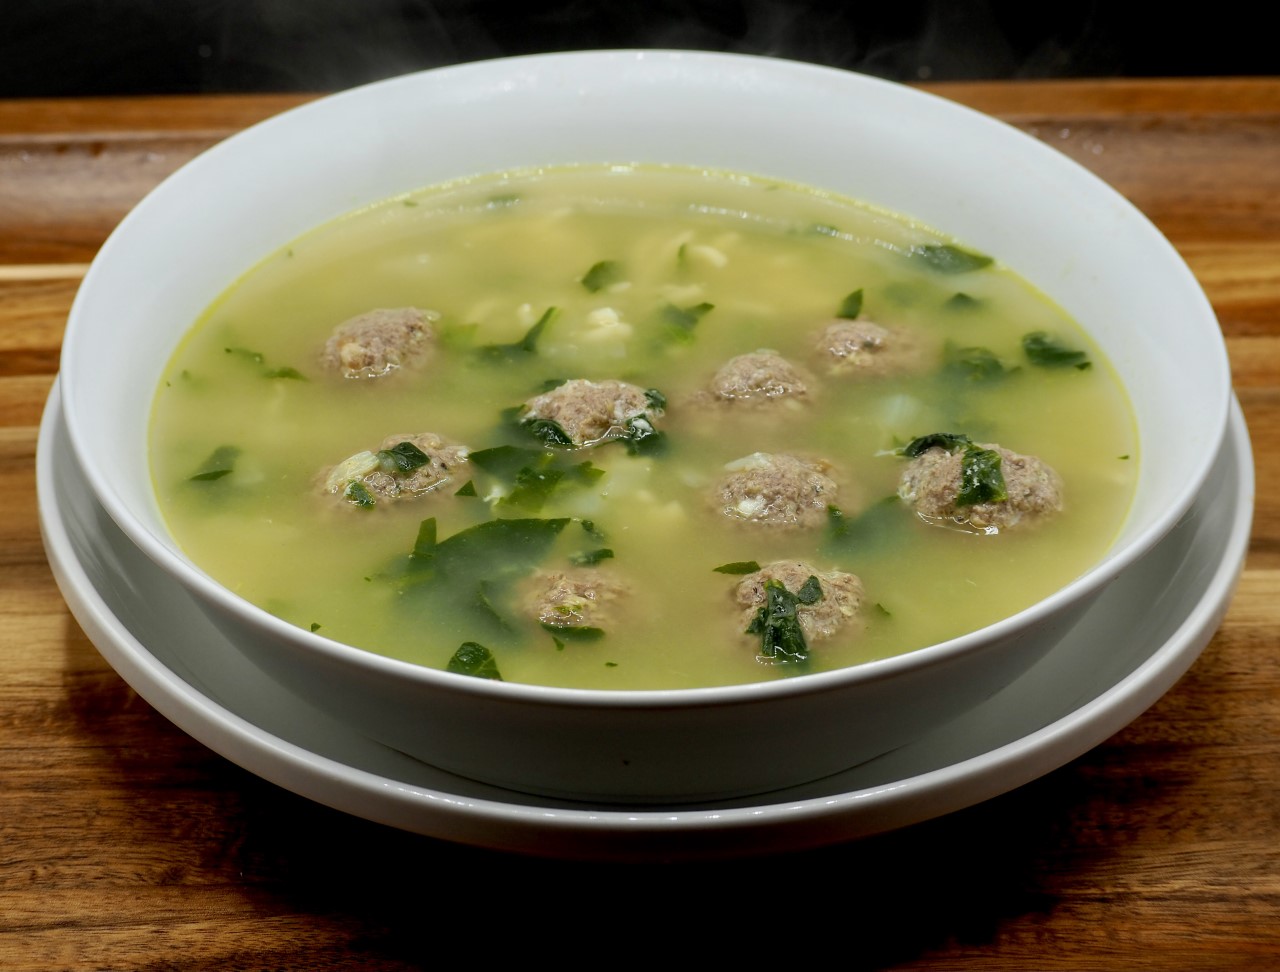 Italian Wedding Soup with Ground Beef and Spinach